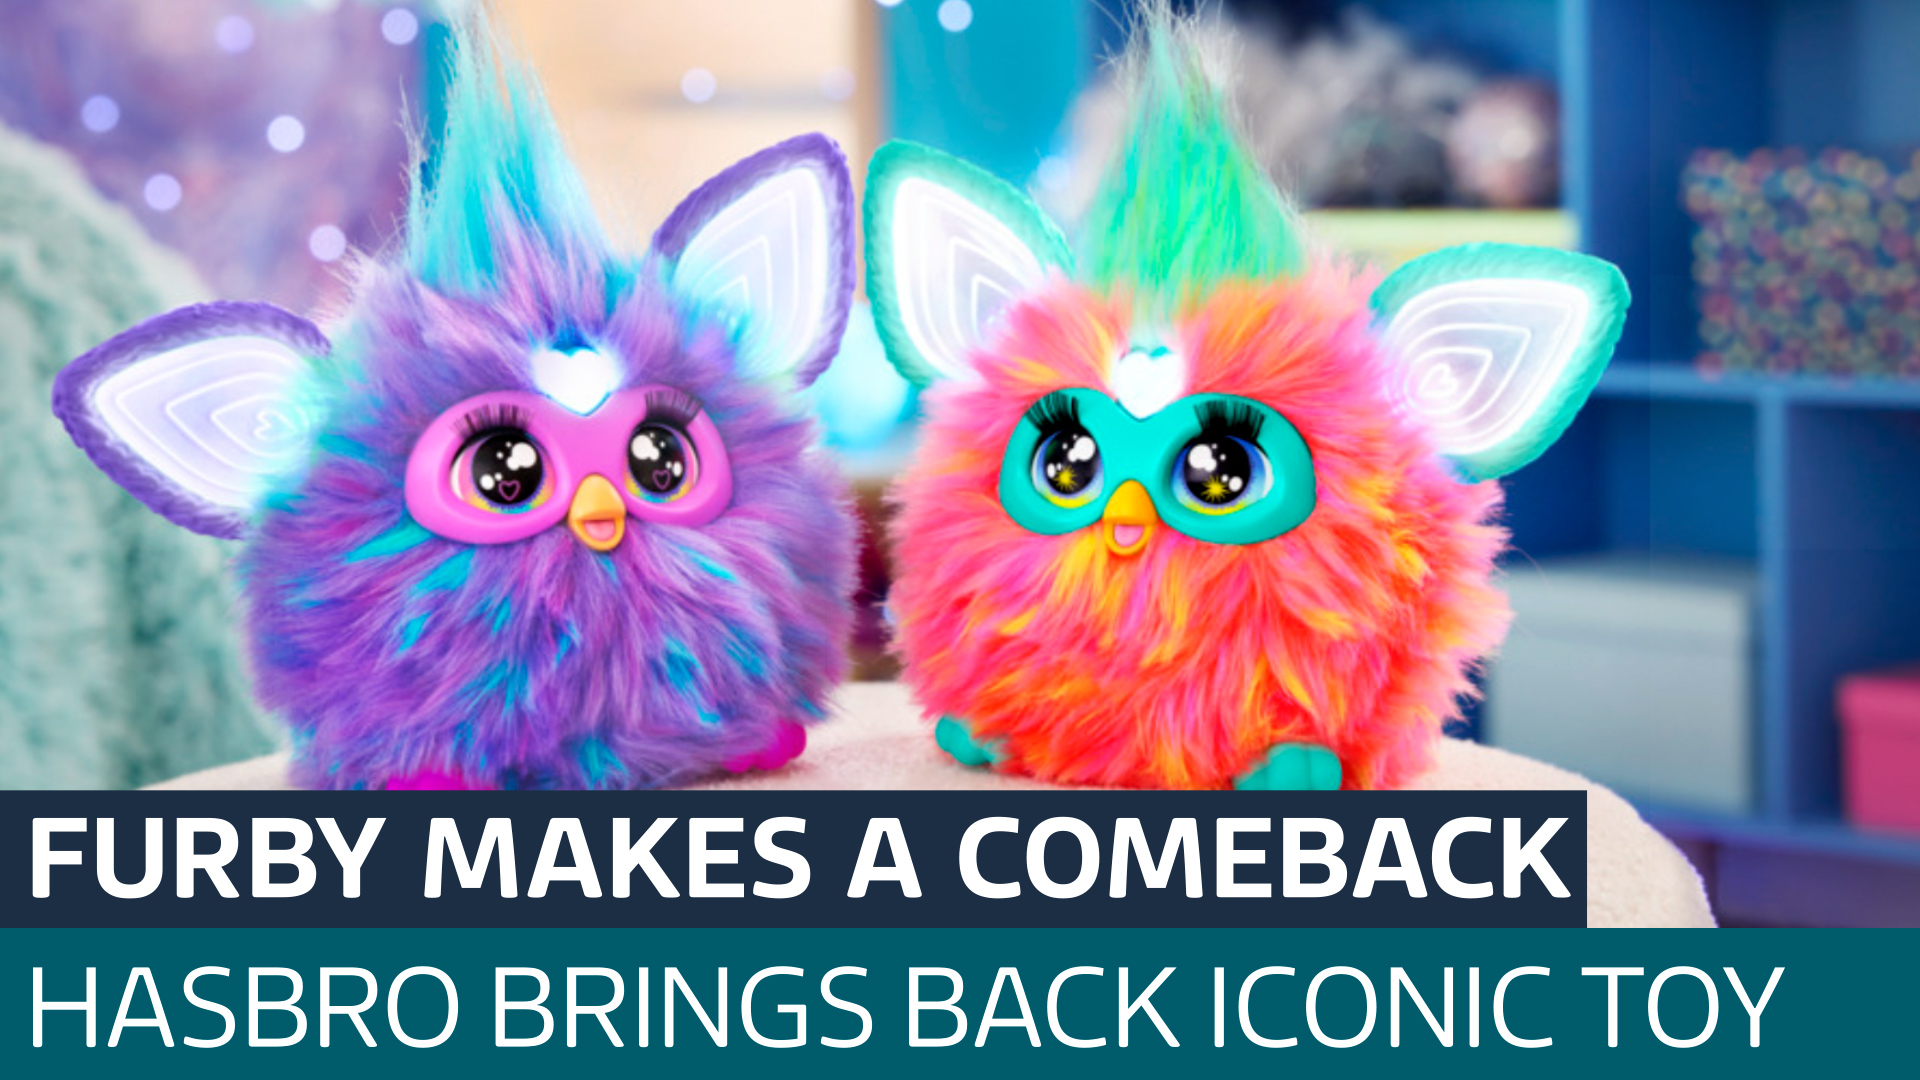 Furby: Toy giant Hasbro brings back iconic robotic creature